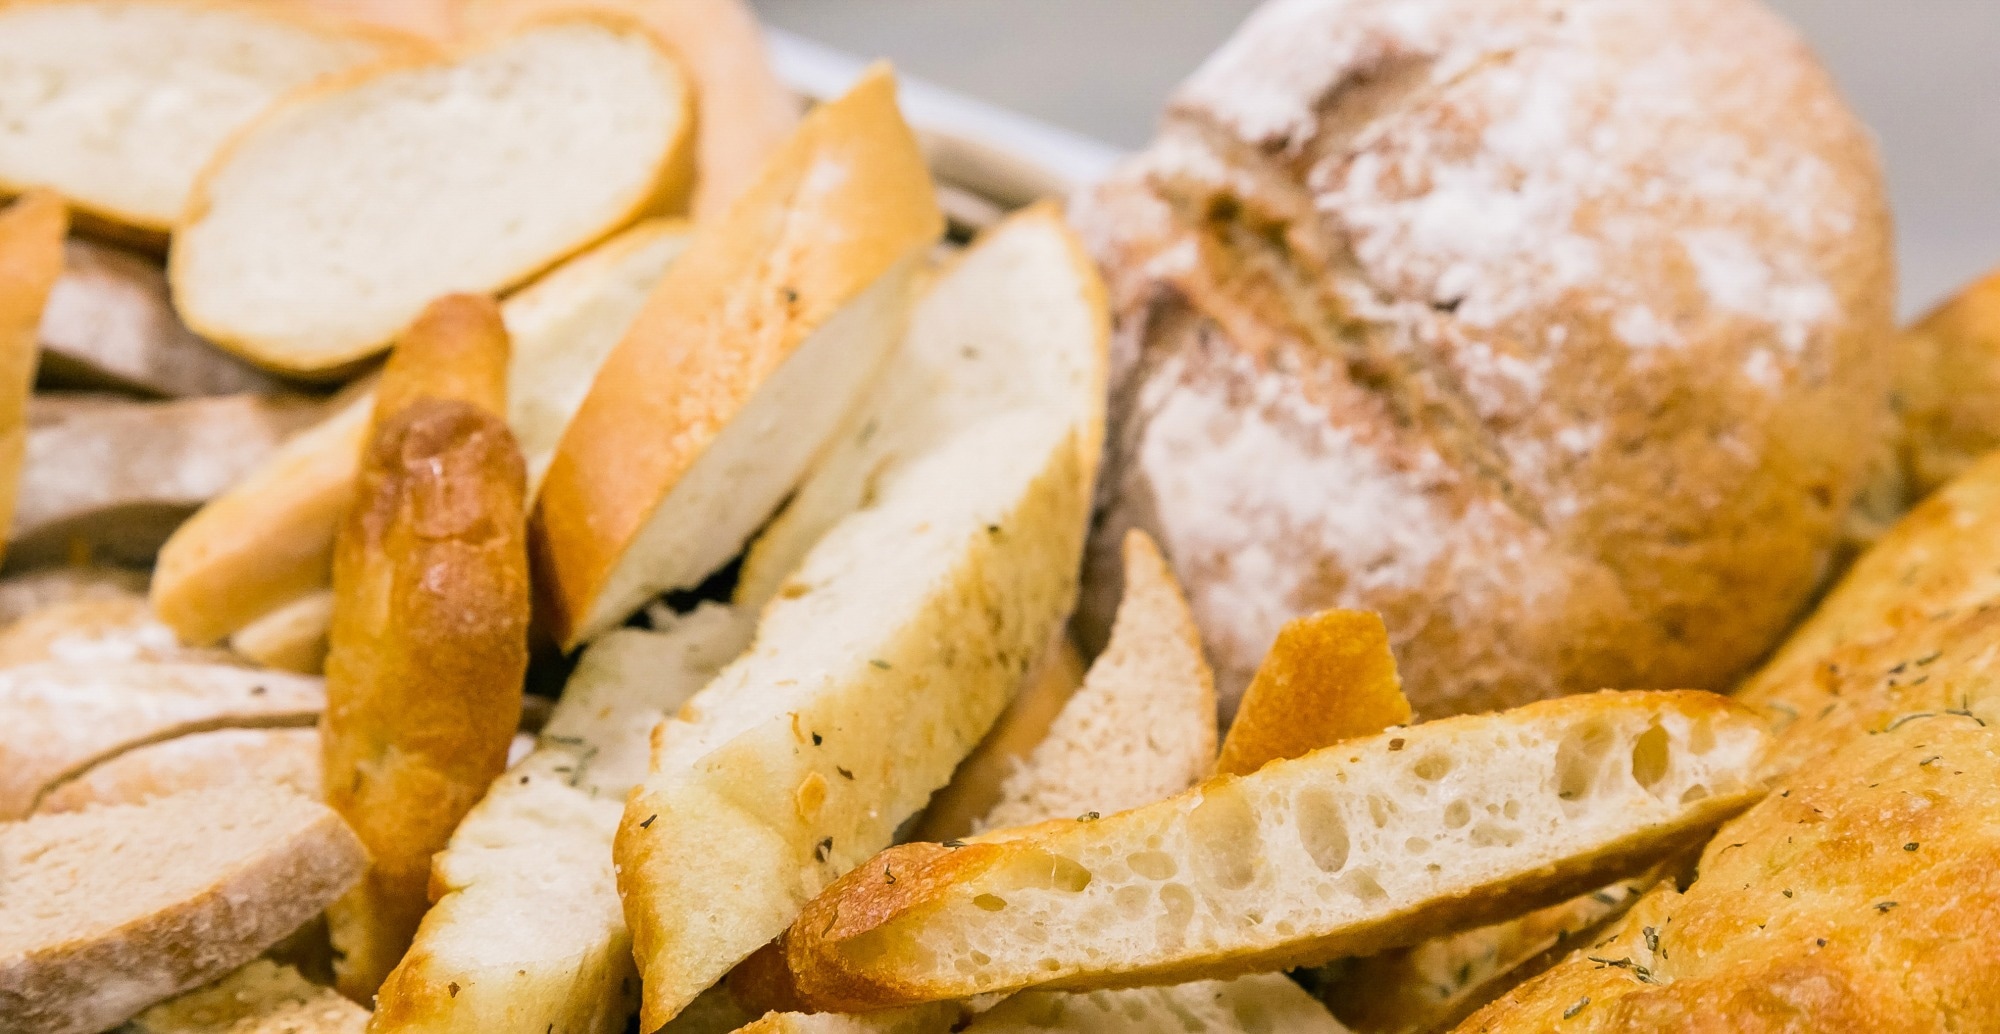 Yeast-fermented bread shows promise in preventing asthma symptoms